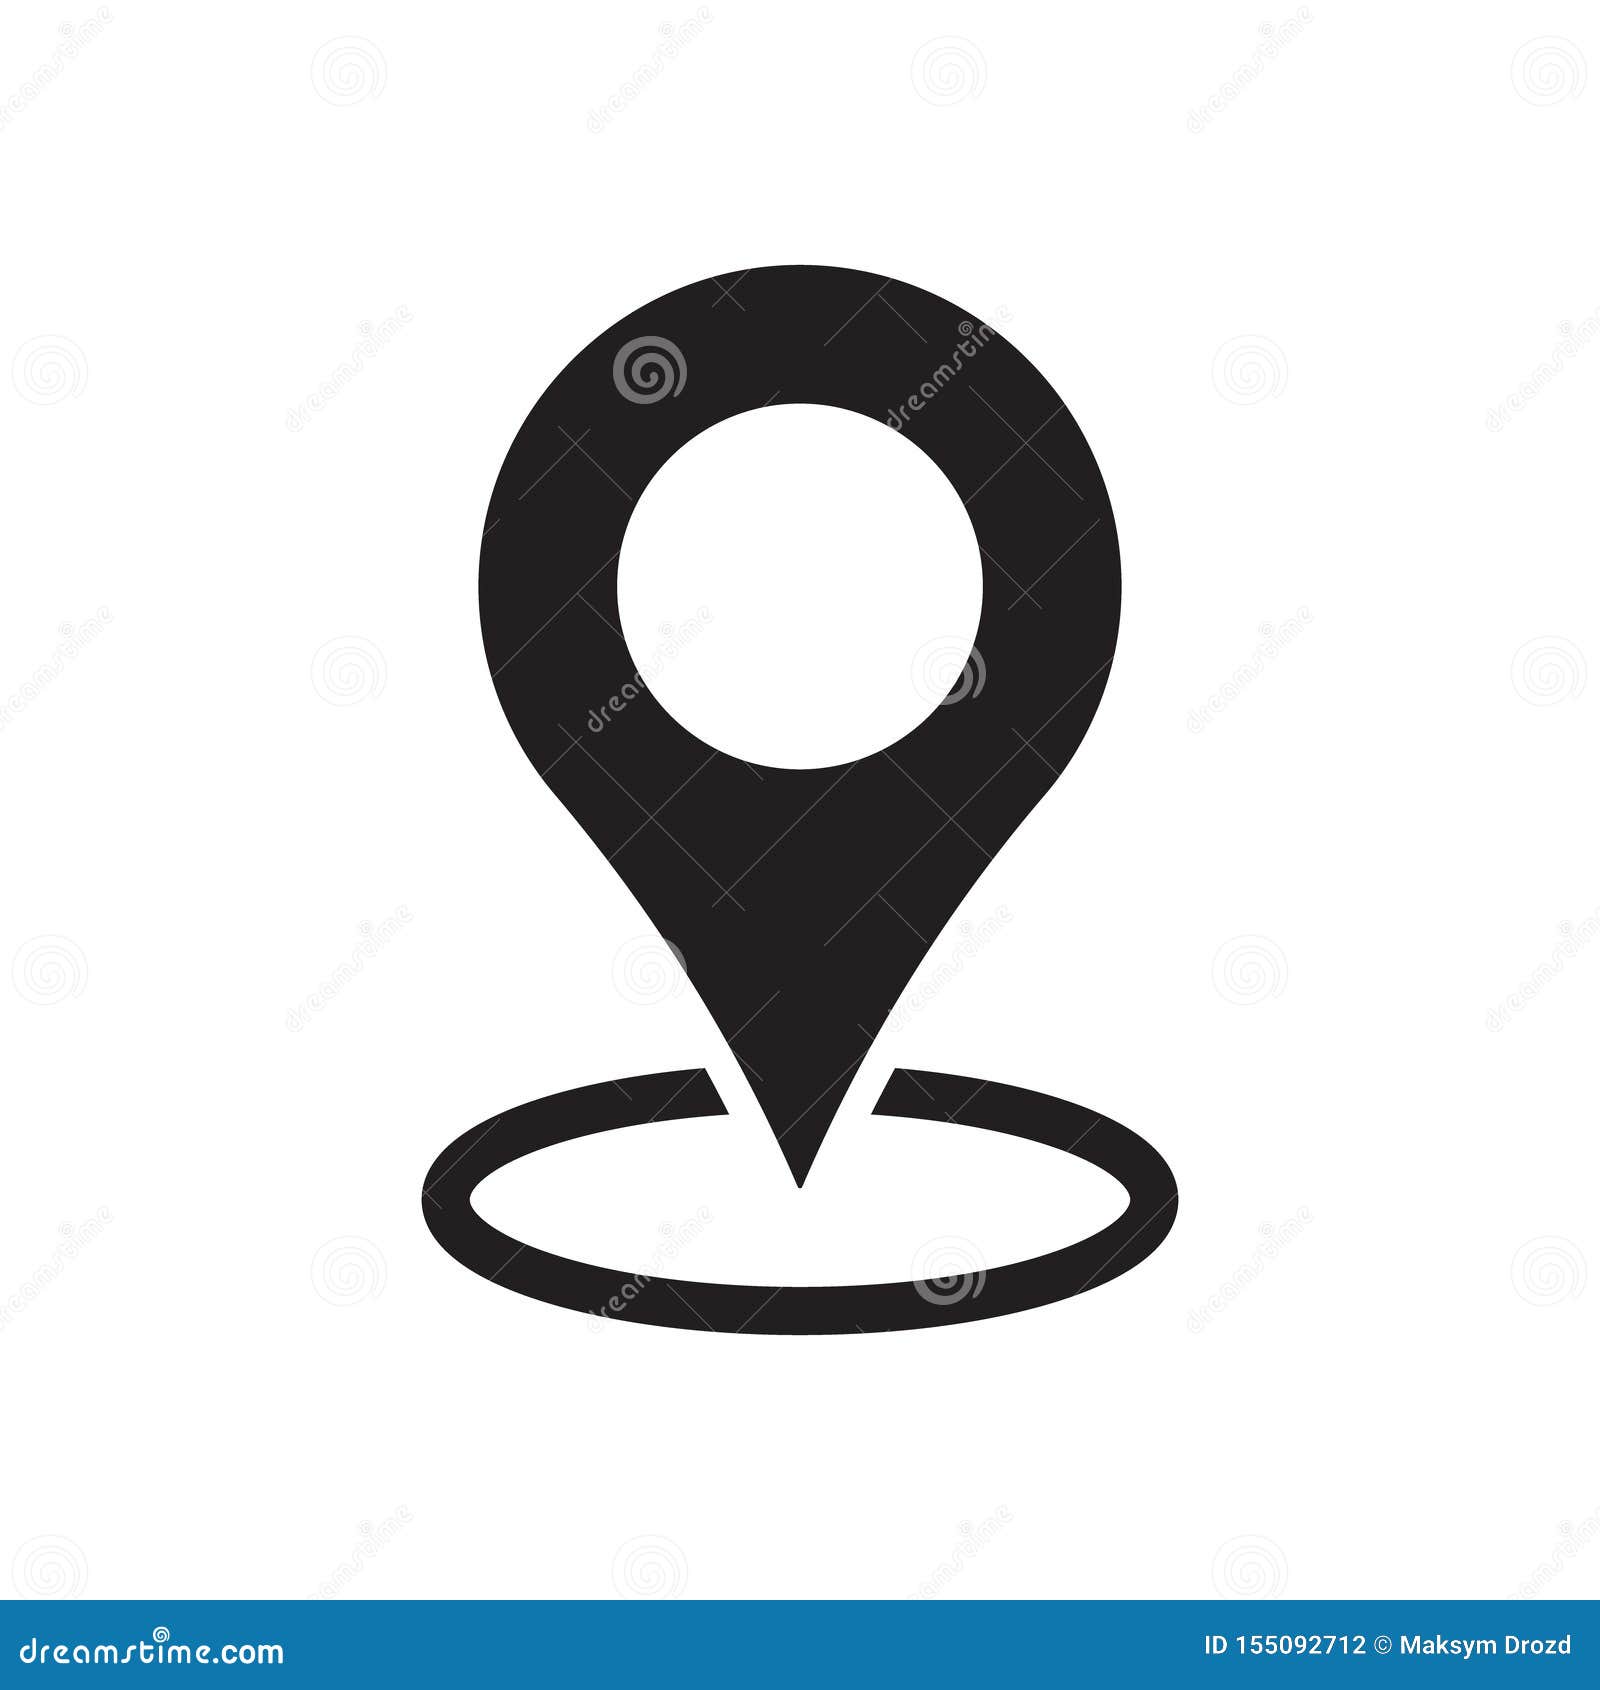 Maps Pin. Location Map Icon Stock Illustration - Illustration of apps ...